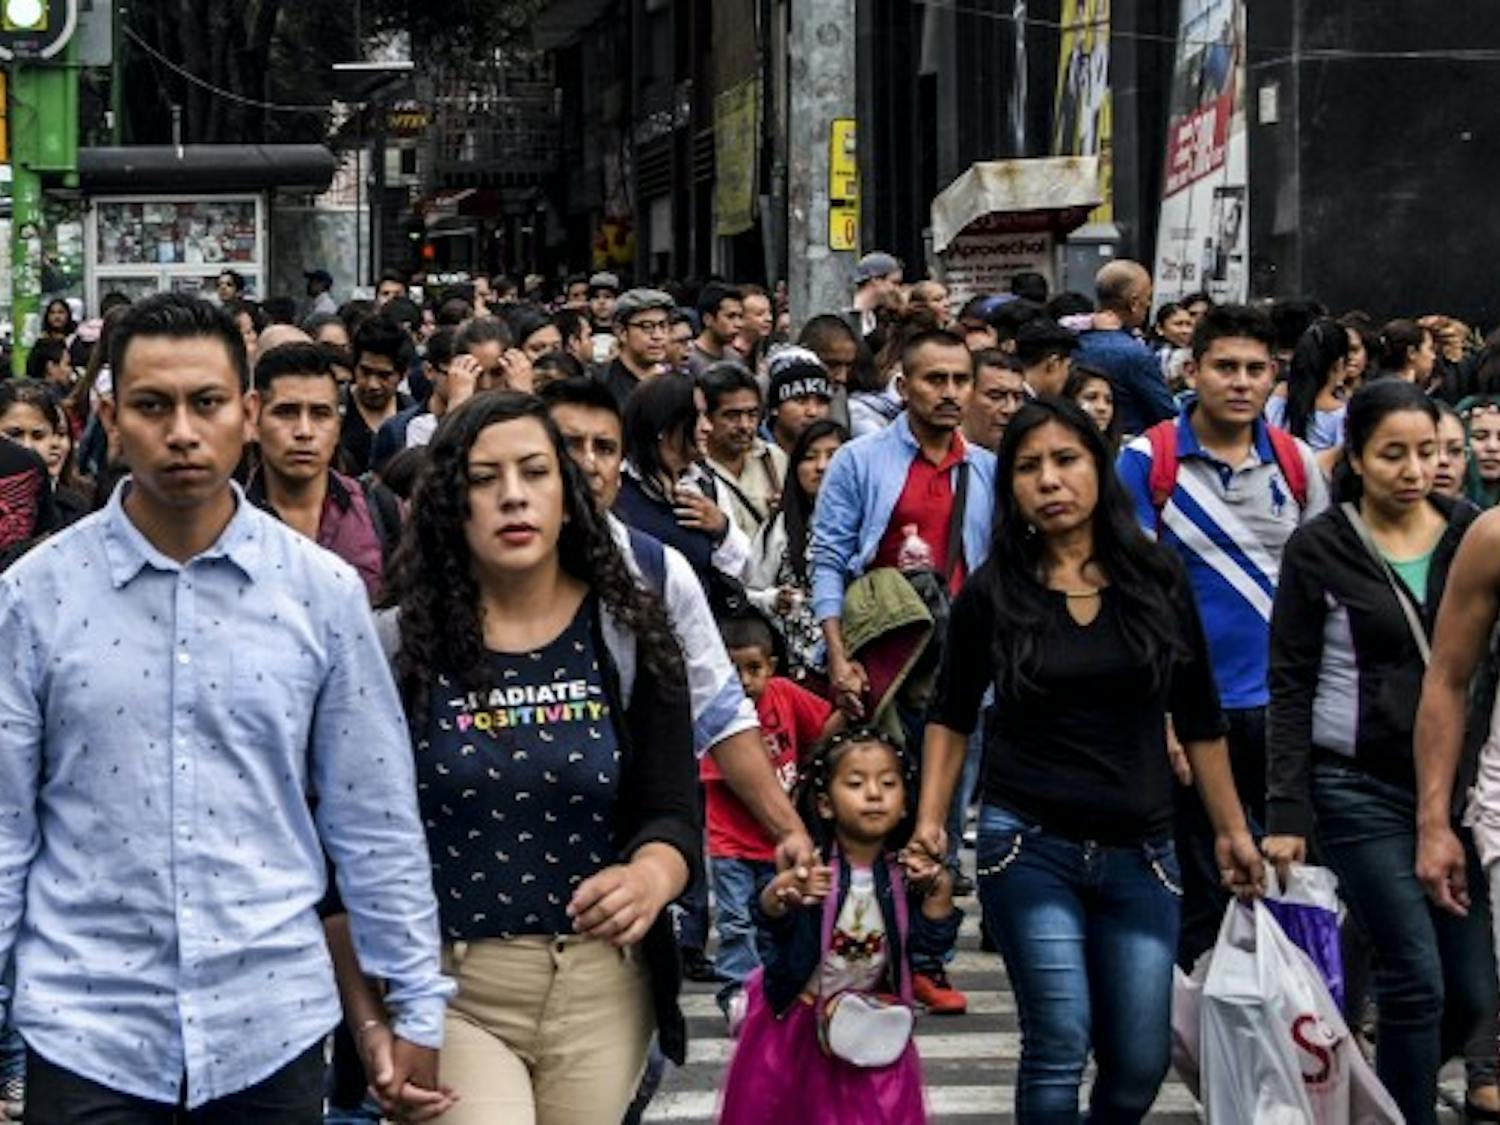 Pedestrian traffic crossing in Mexico City July 11, 2018.